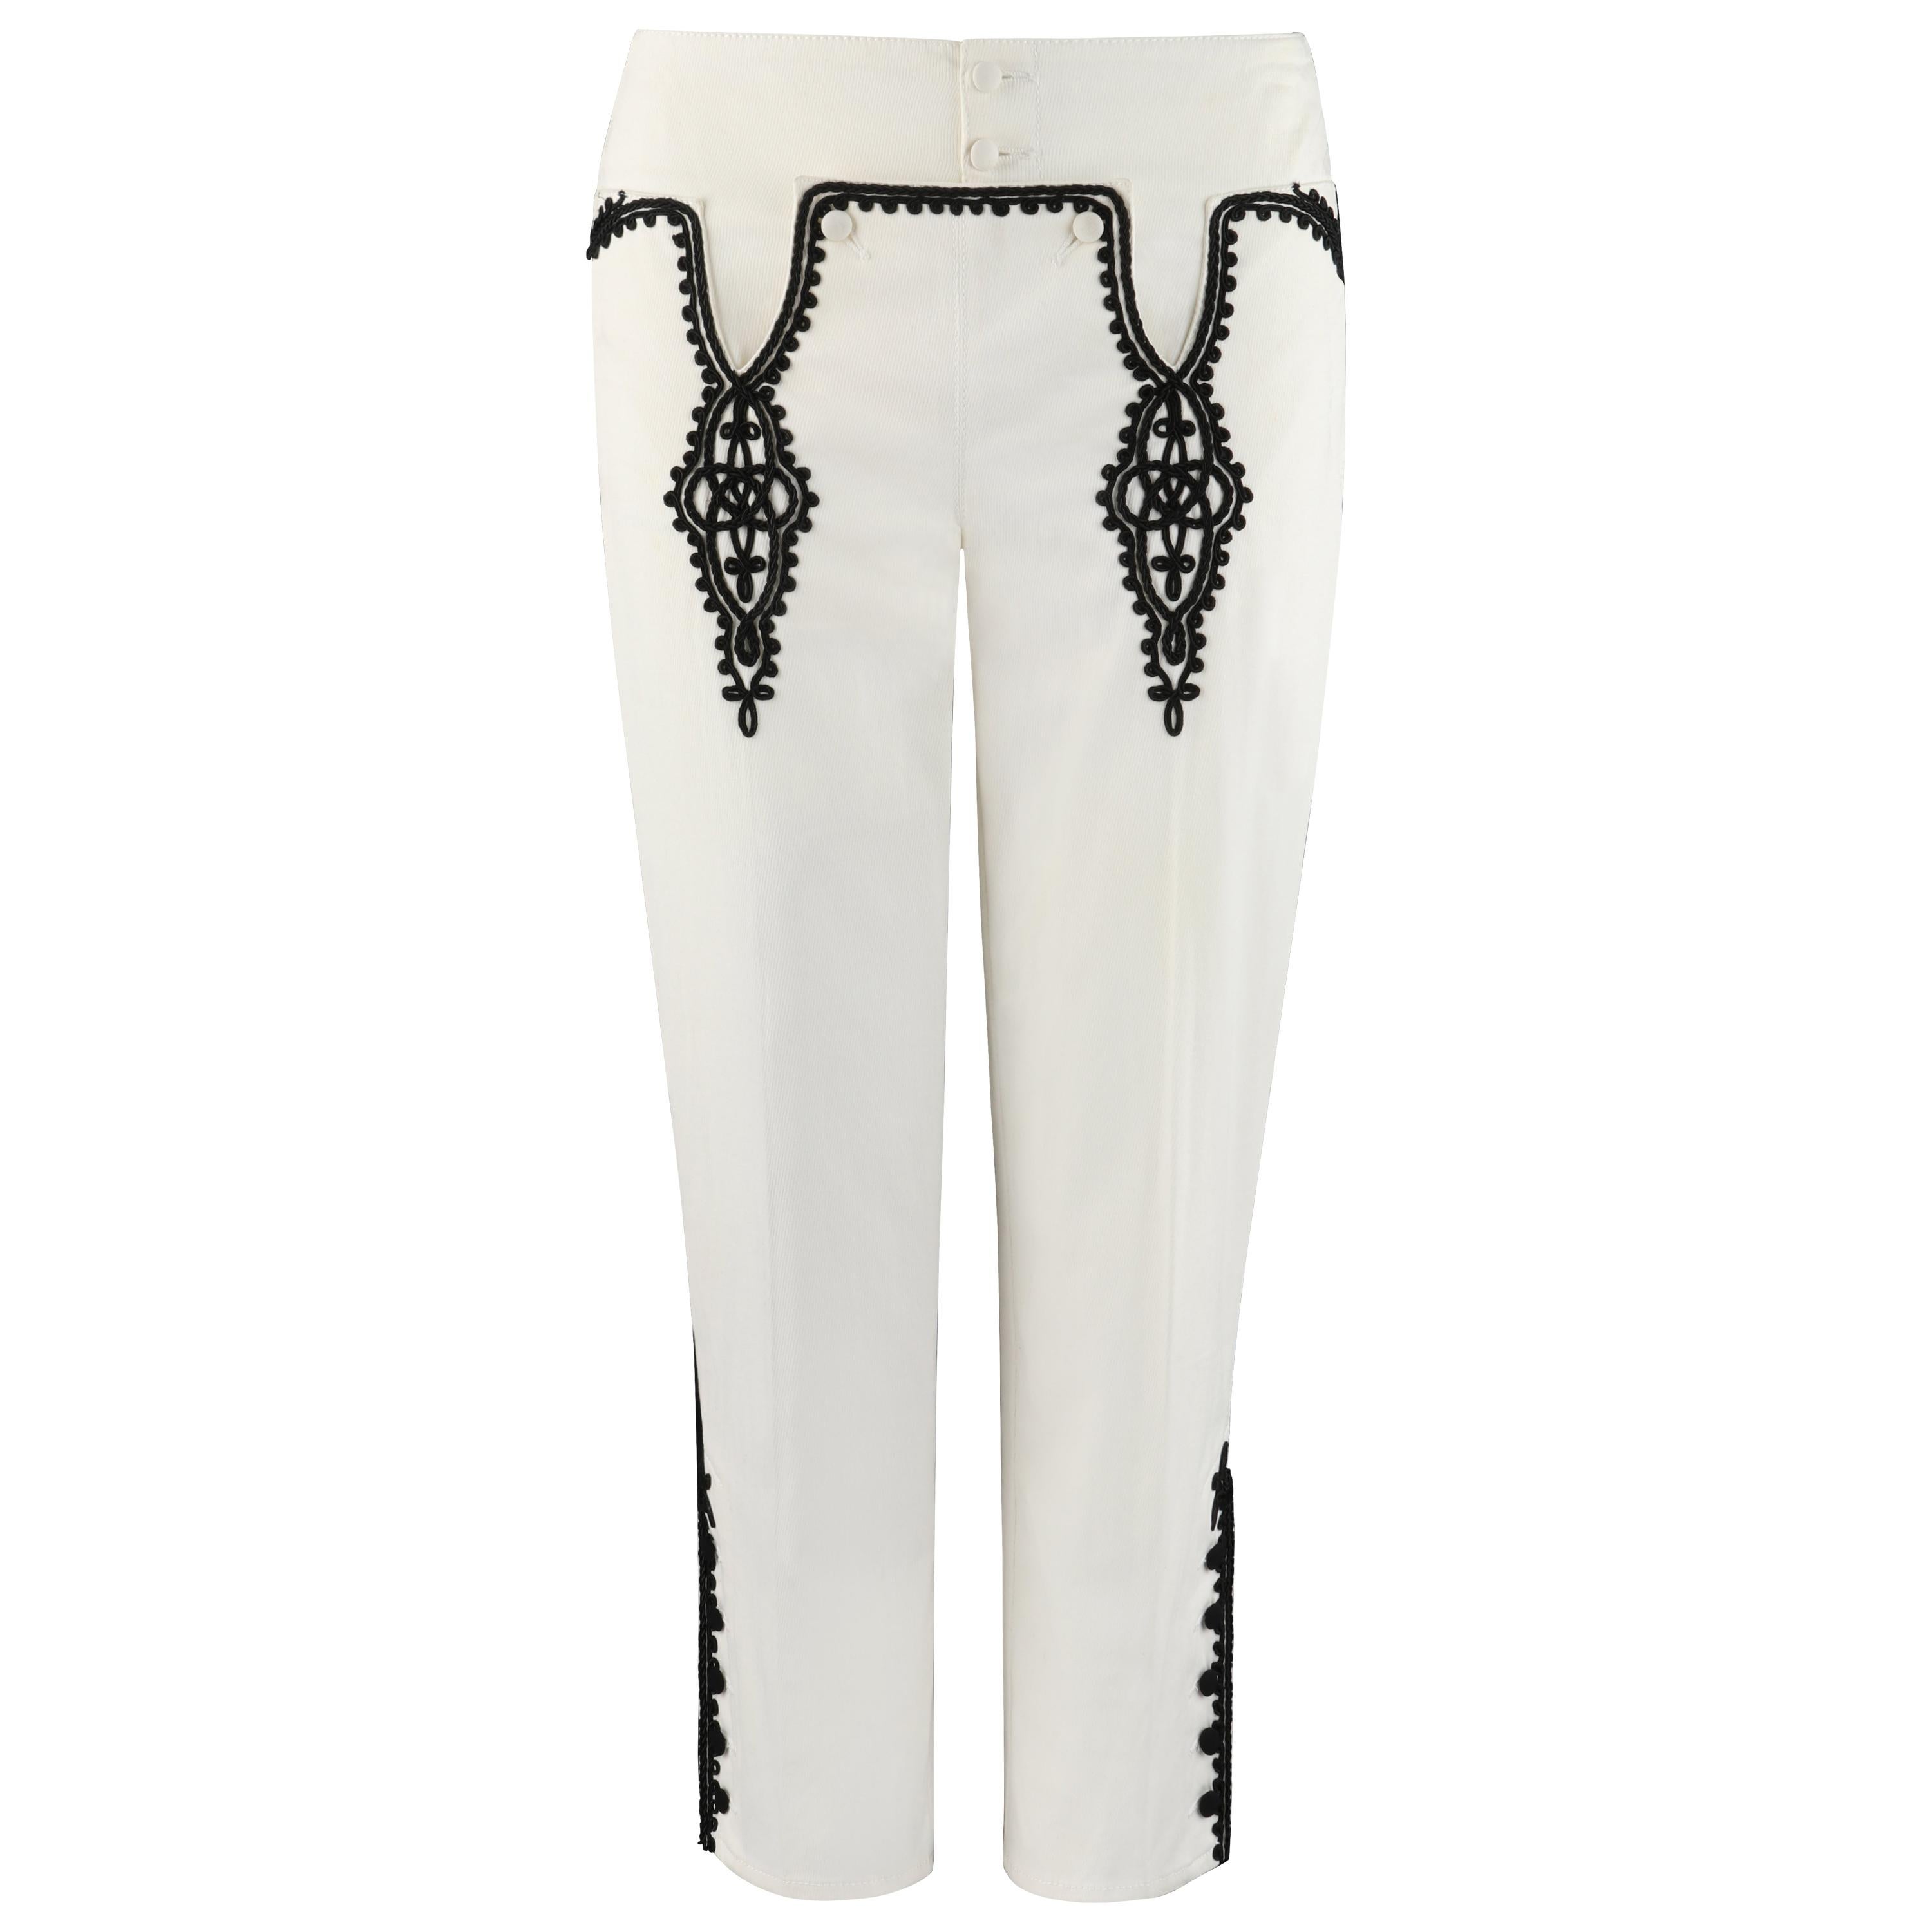 ALEXANDER McQUEEN S/S 2007 "Sarabande" Off White Black Low Rise Jeans Pants